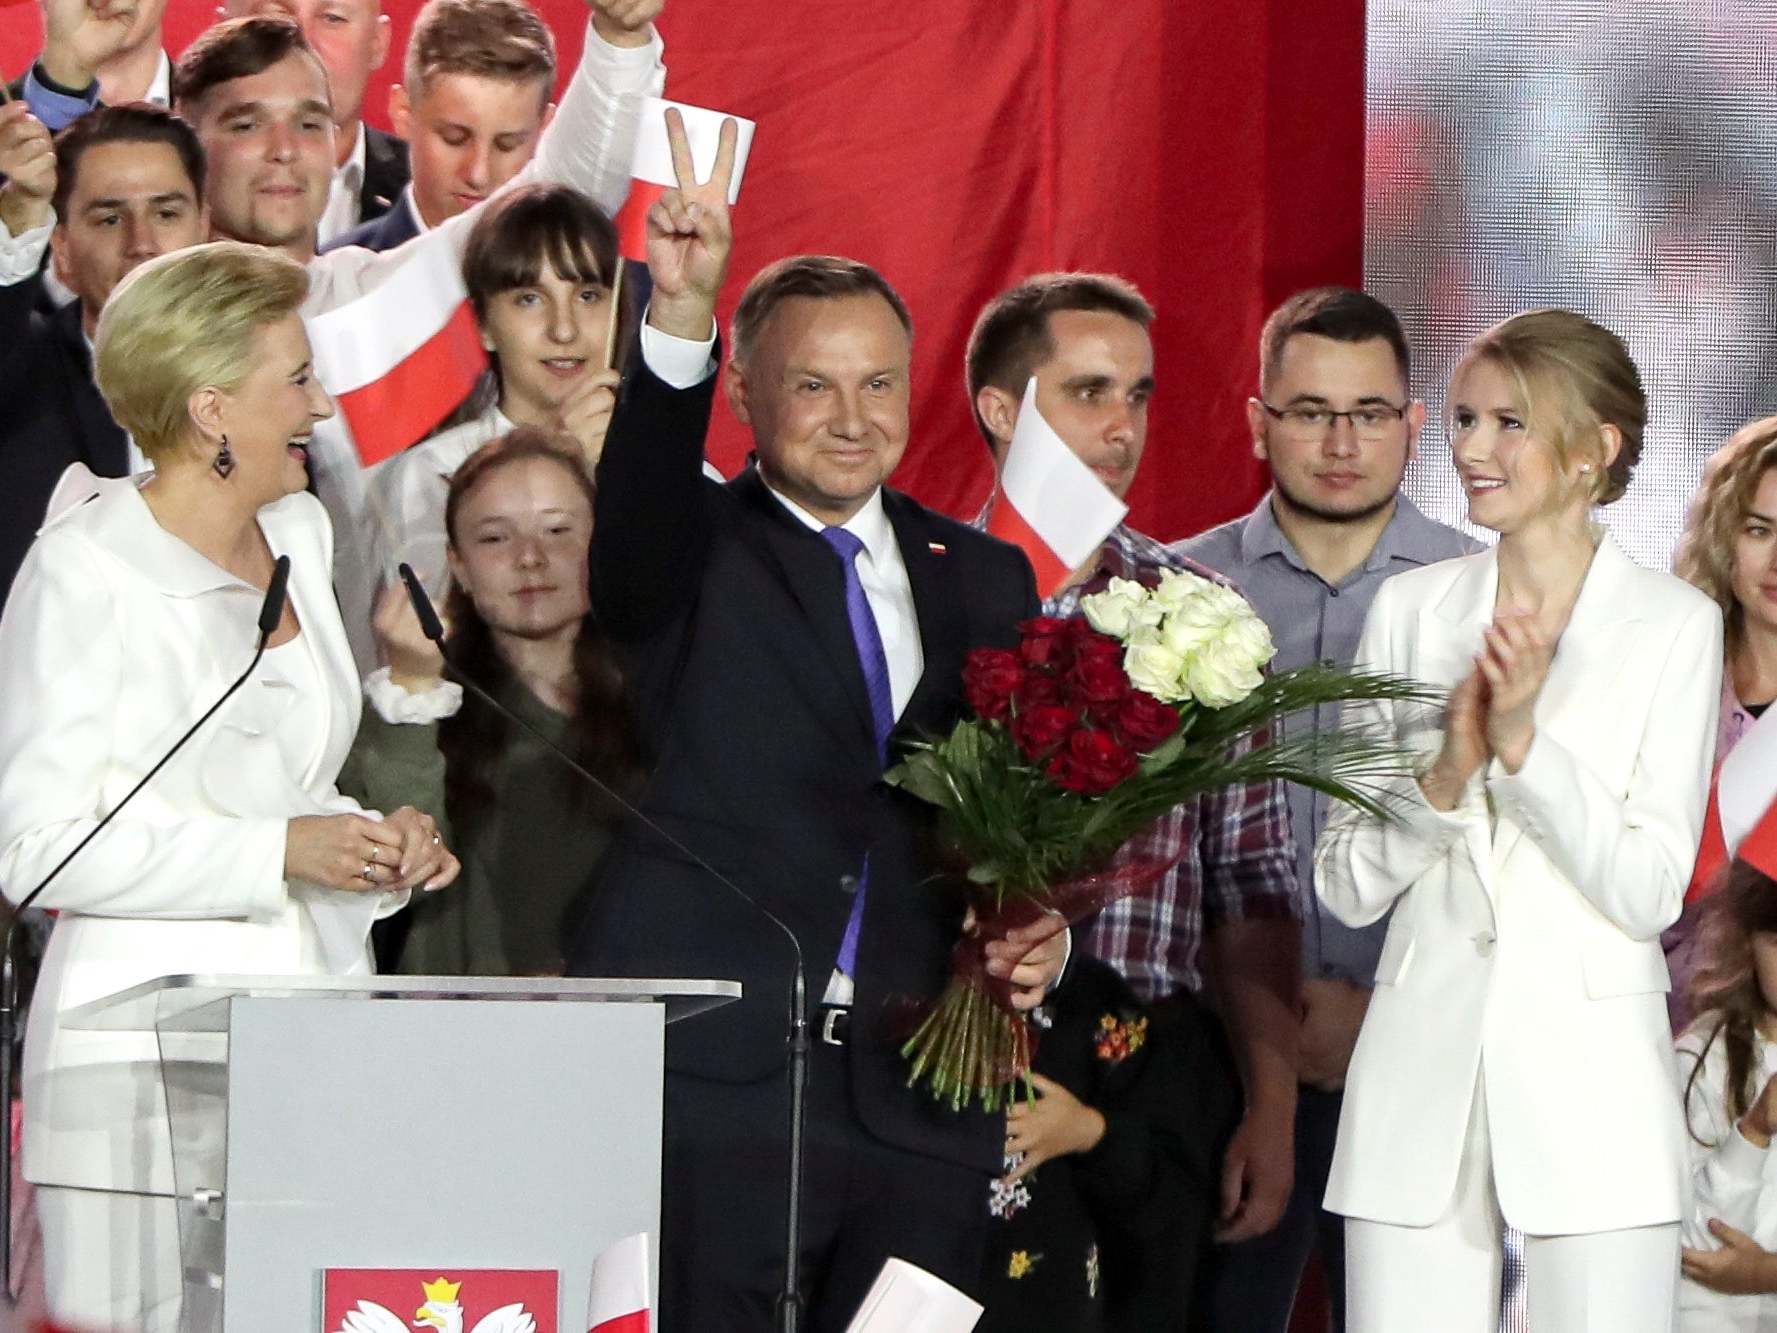 Poland election: President Andrzej Duda on course for narrow victory, exit poll and early results show